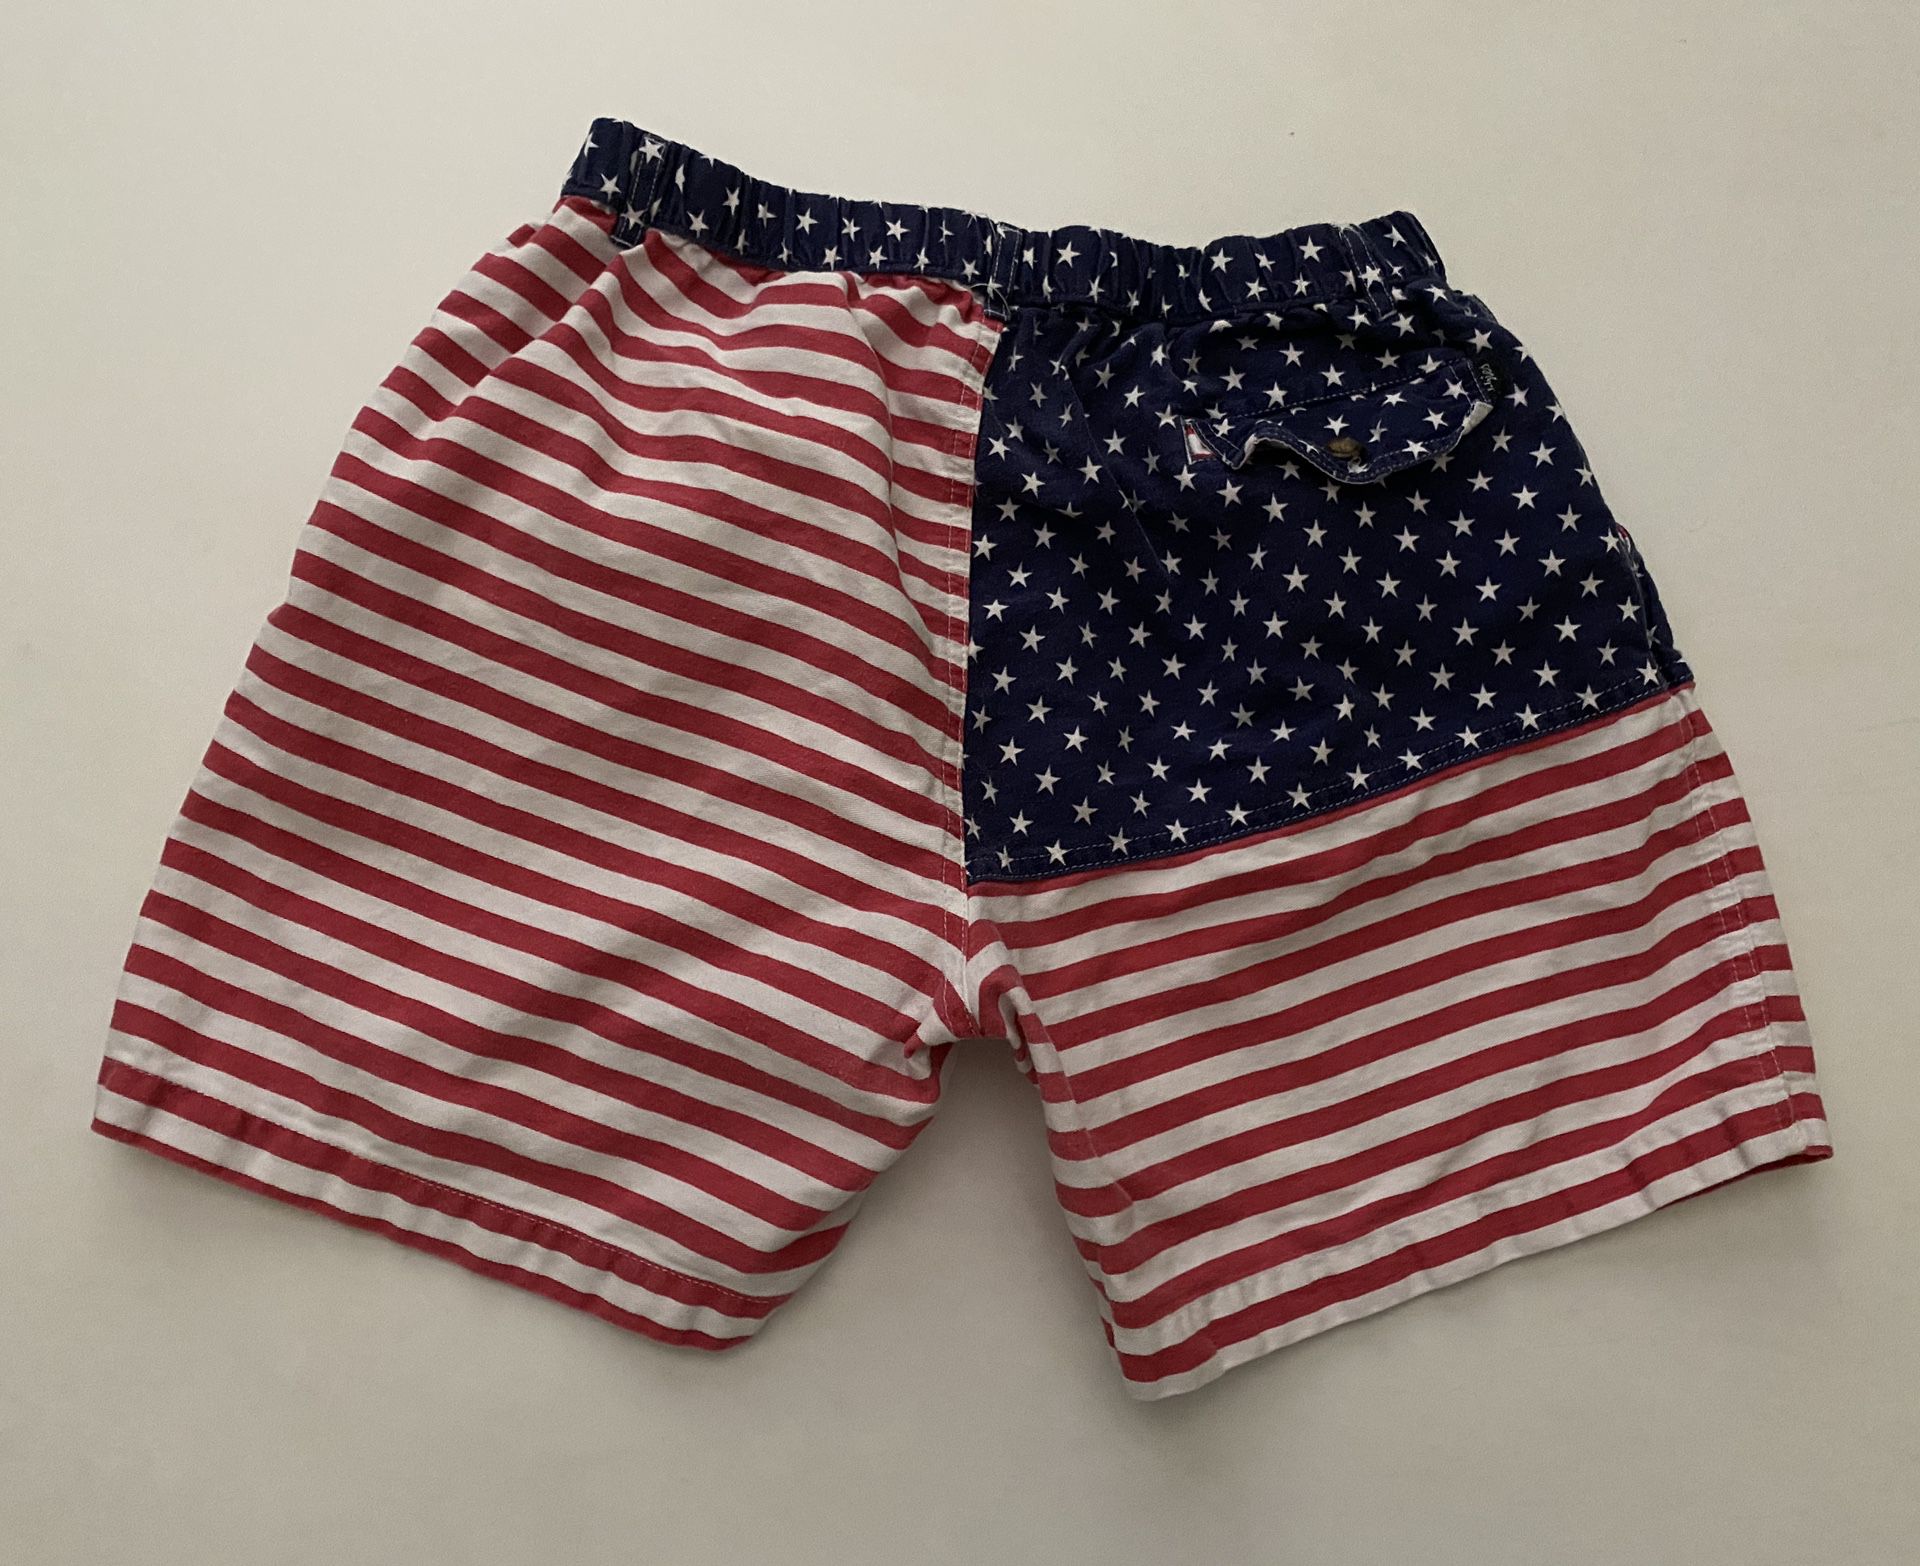 Chubbies Vintage Style Shorts ‘Mericas USA Flag 4th of July Men’s XL ...